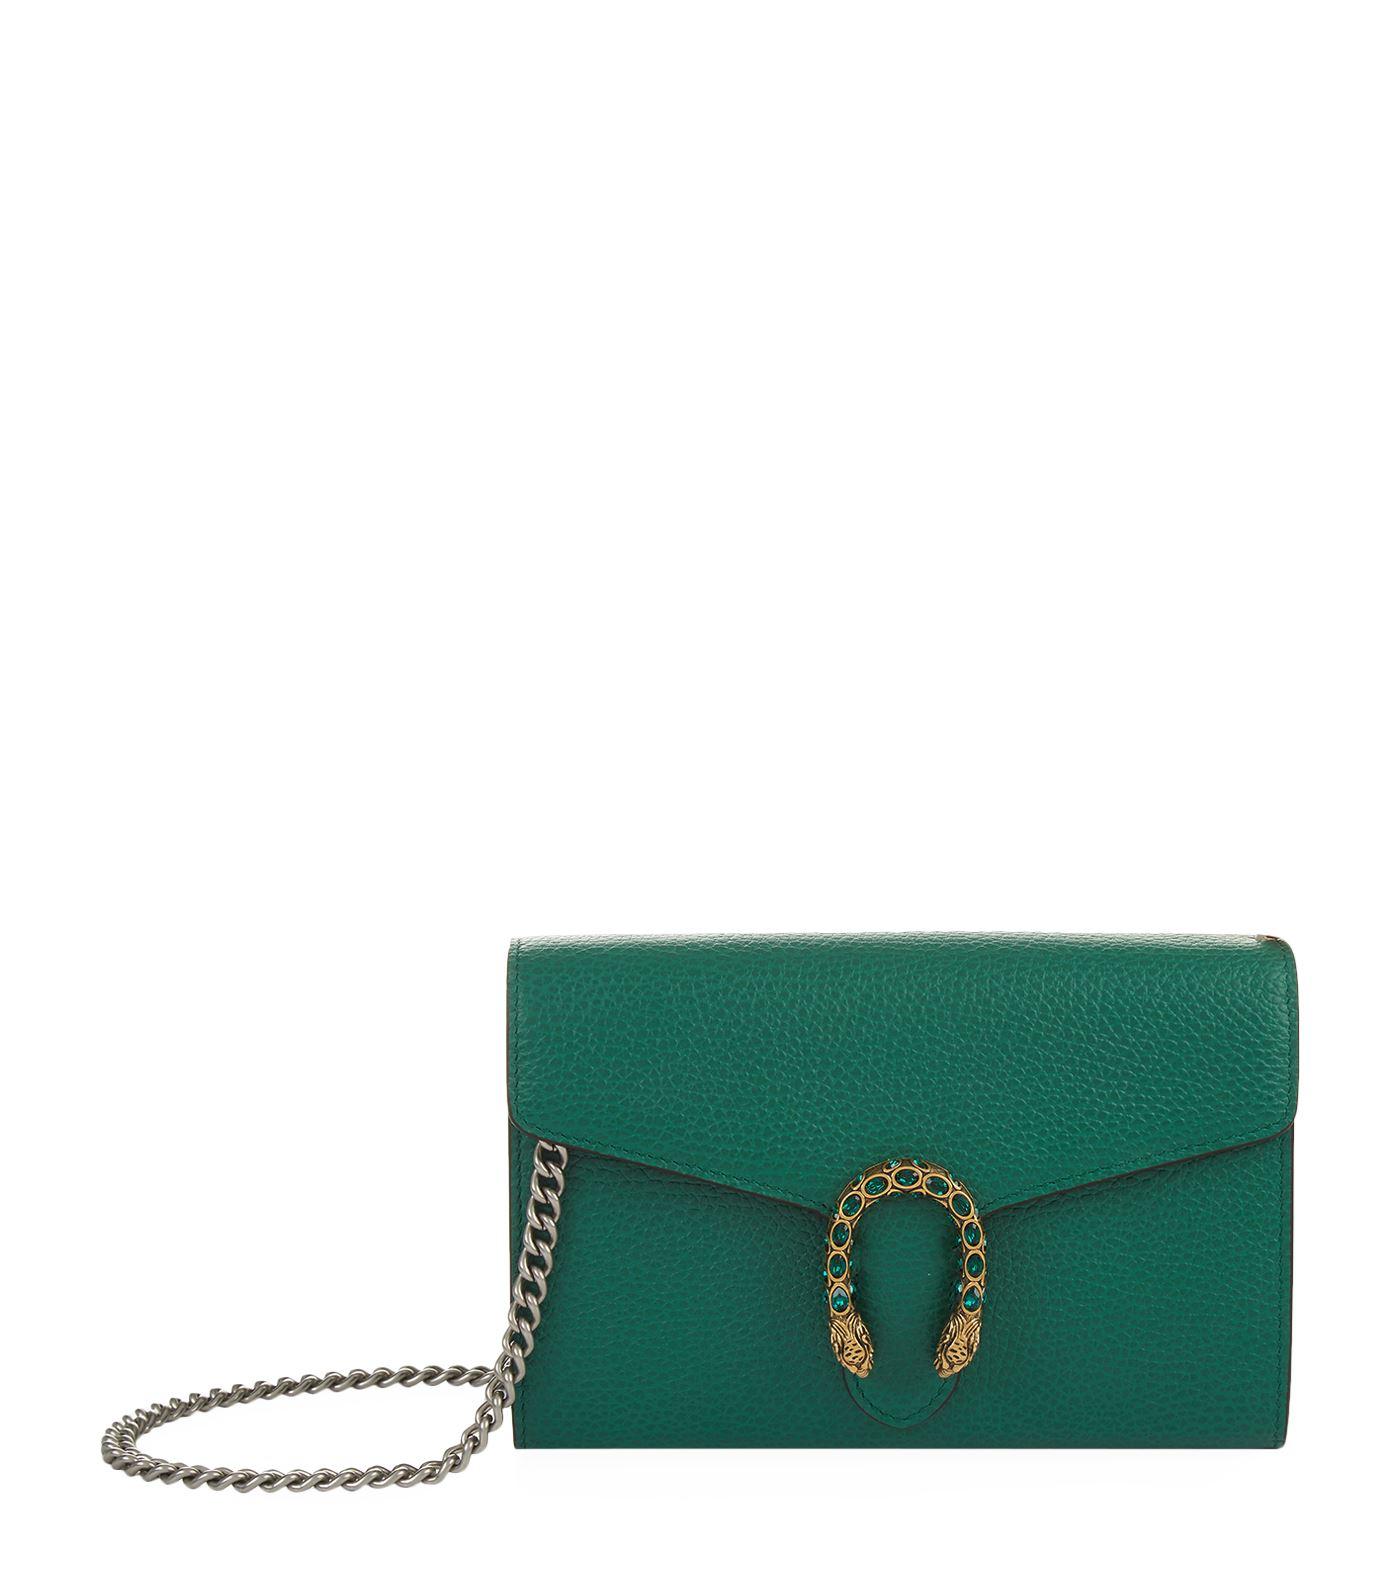 Gucci Mini Leather Dionysus Shoulder Bag in Red - Lyst